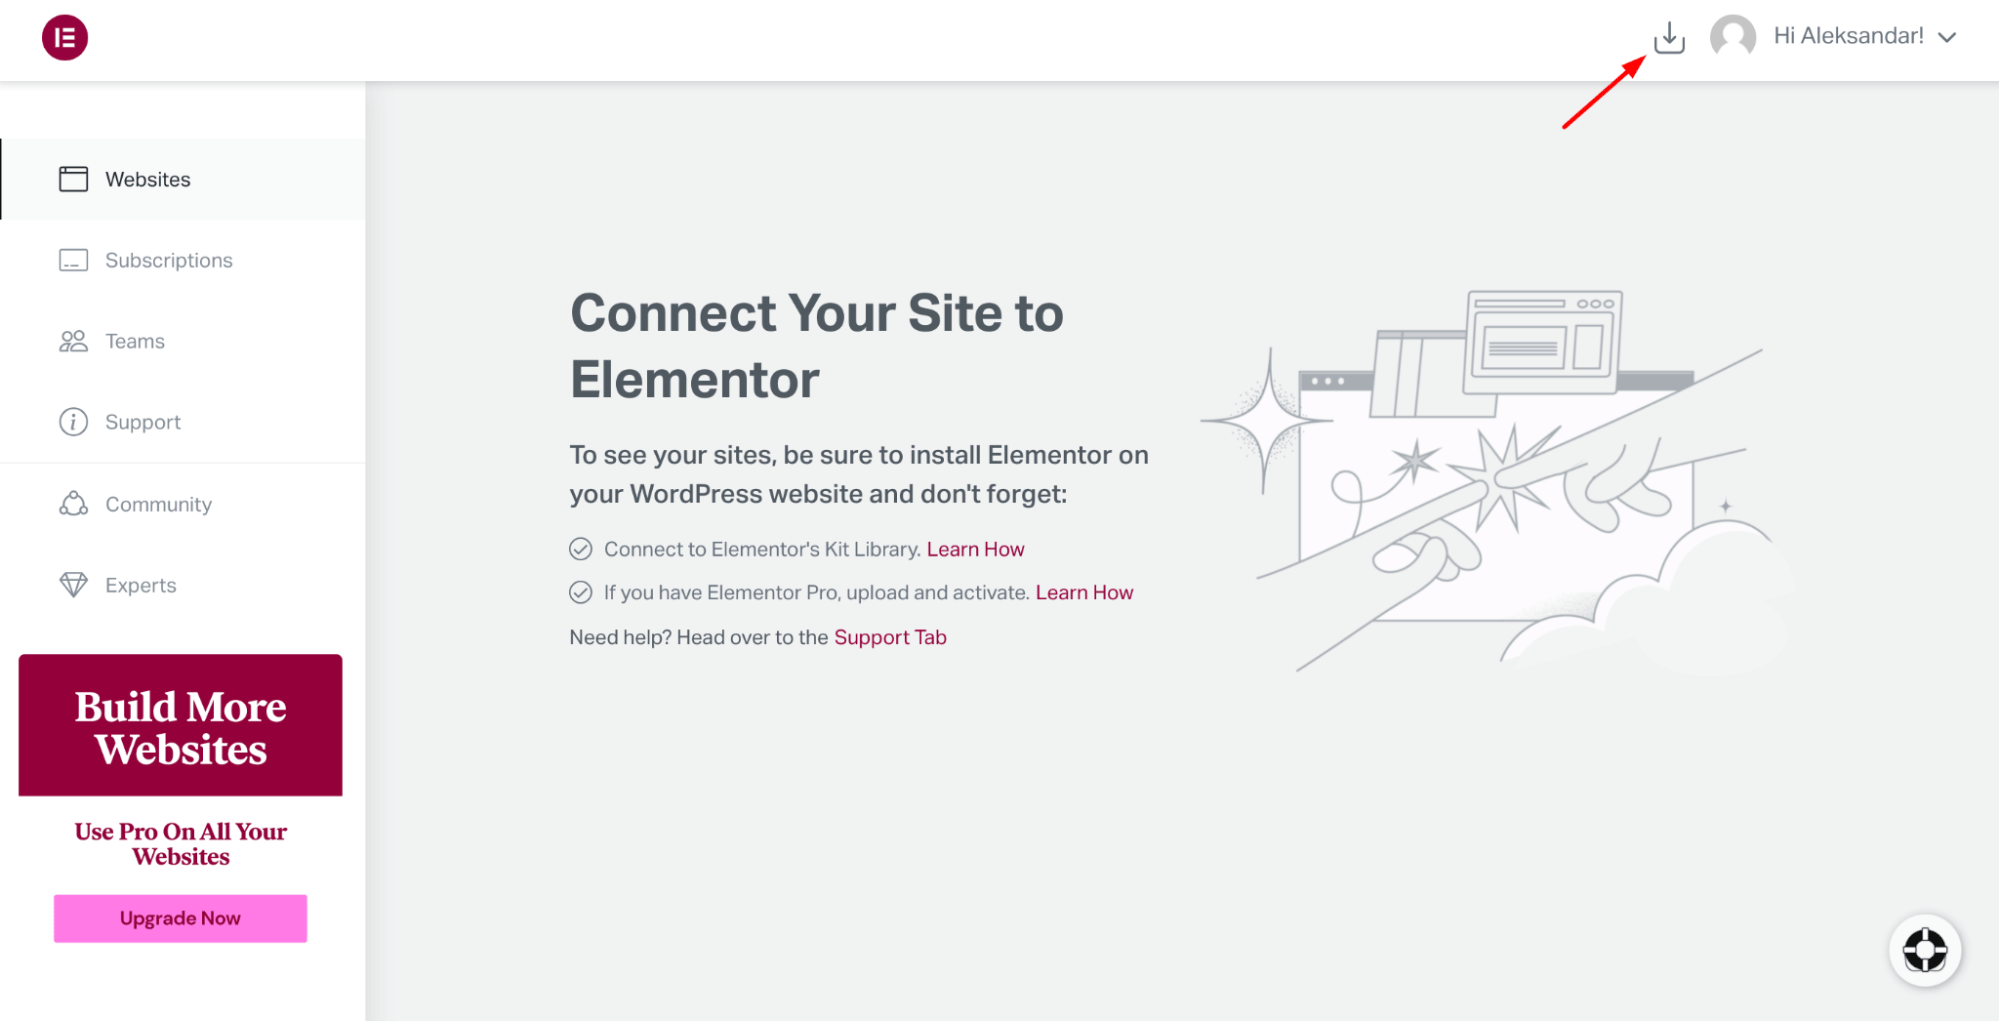 Connect Your Site to Elementor